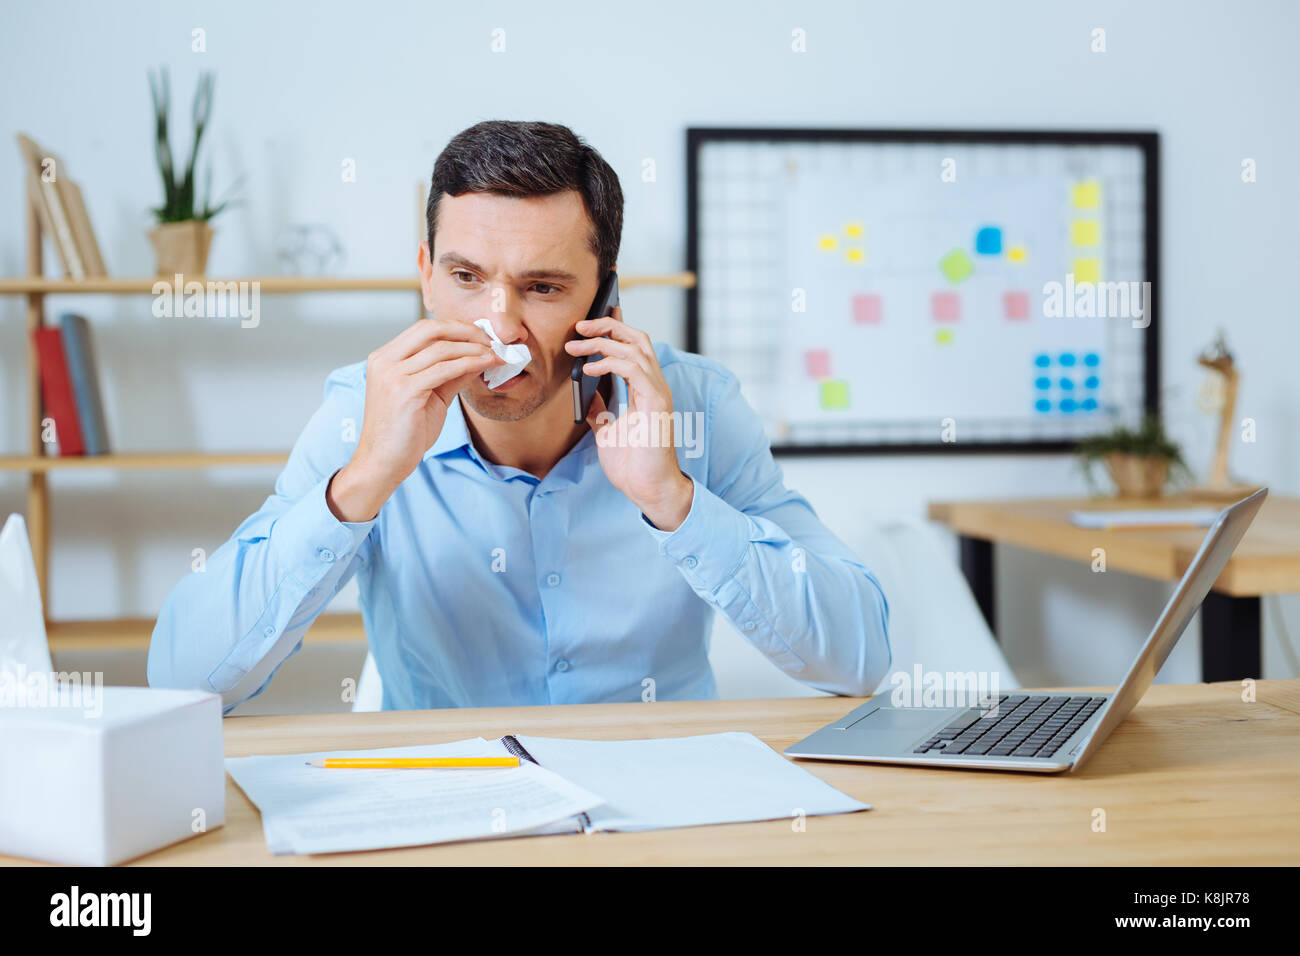 Attentive office worker having telephone call Stock Photo